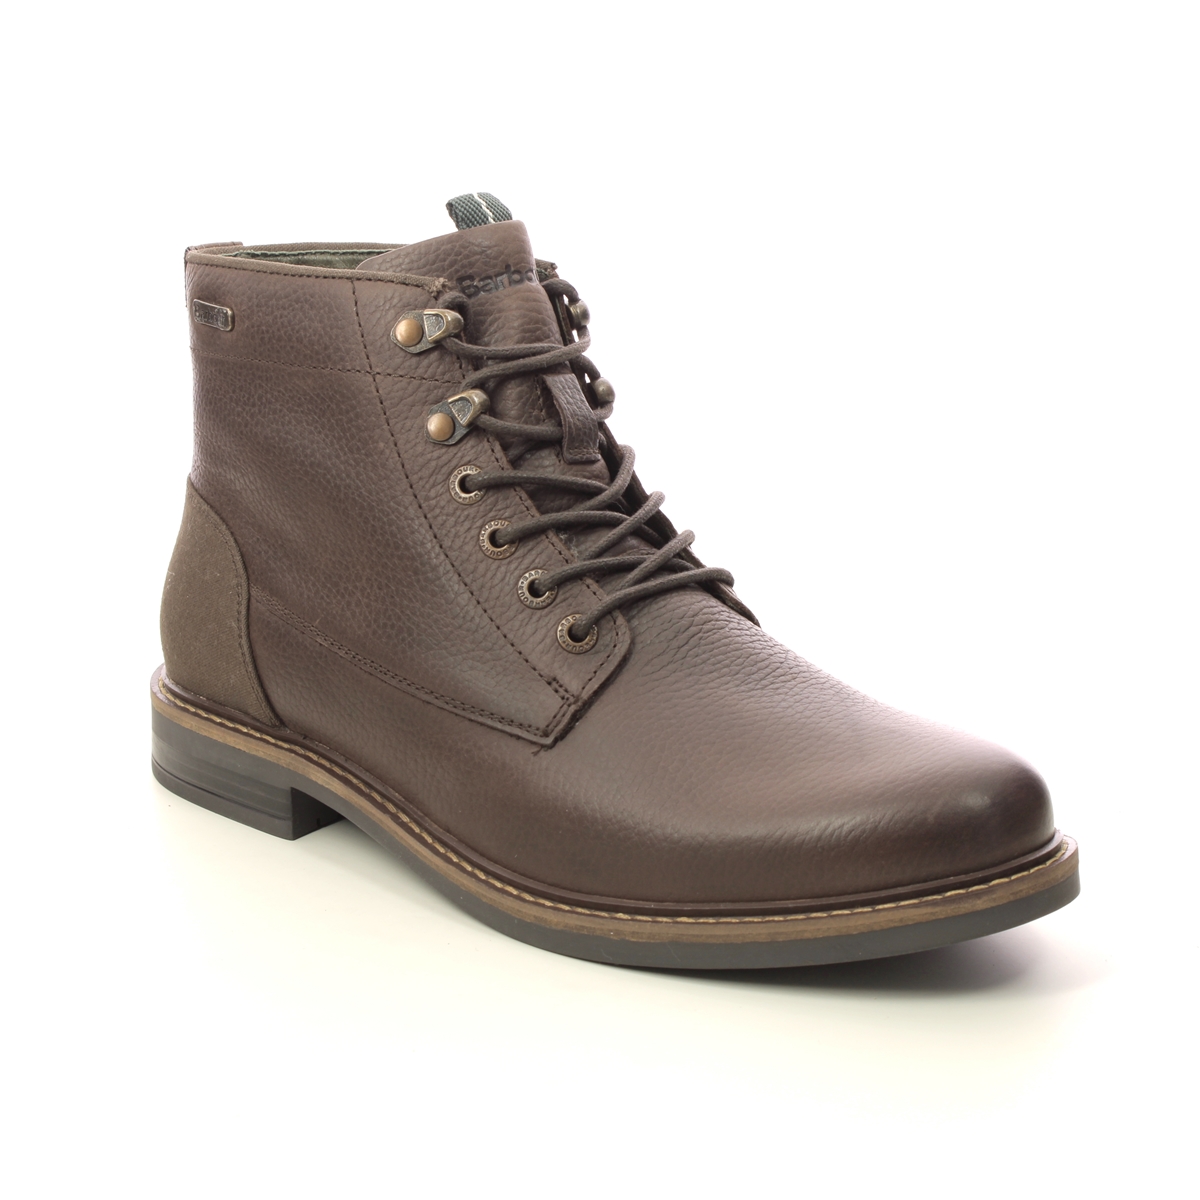 Barbour Deckham Derby Brown Leather Boots Mfo0644-Br77 In Size 8 In Plain Brown Leather